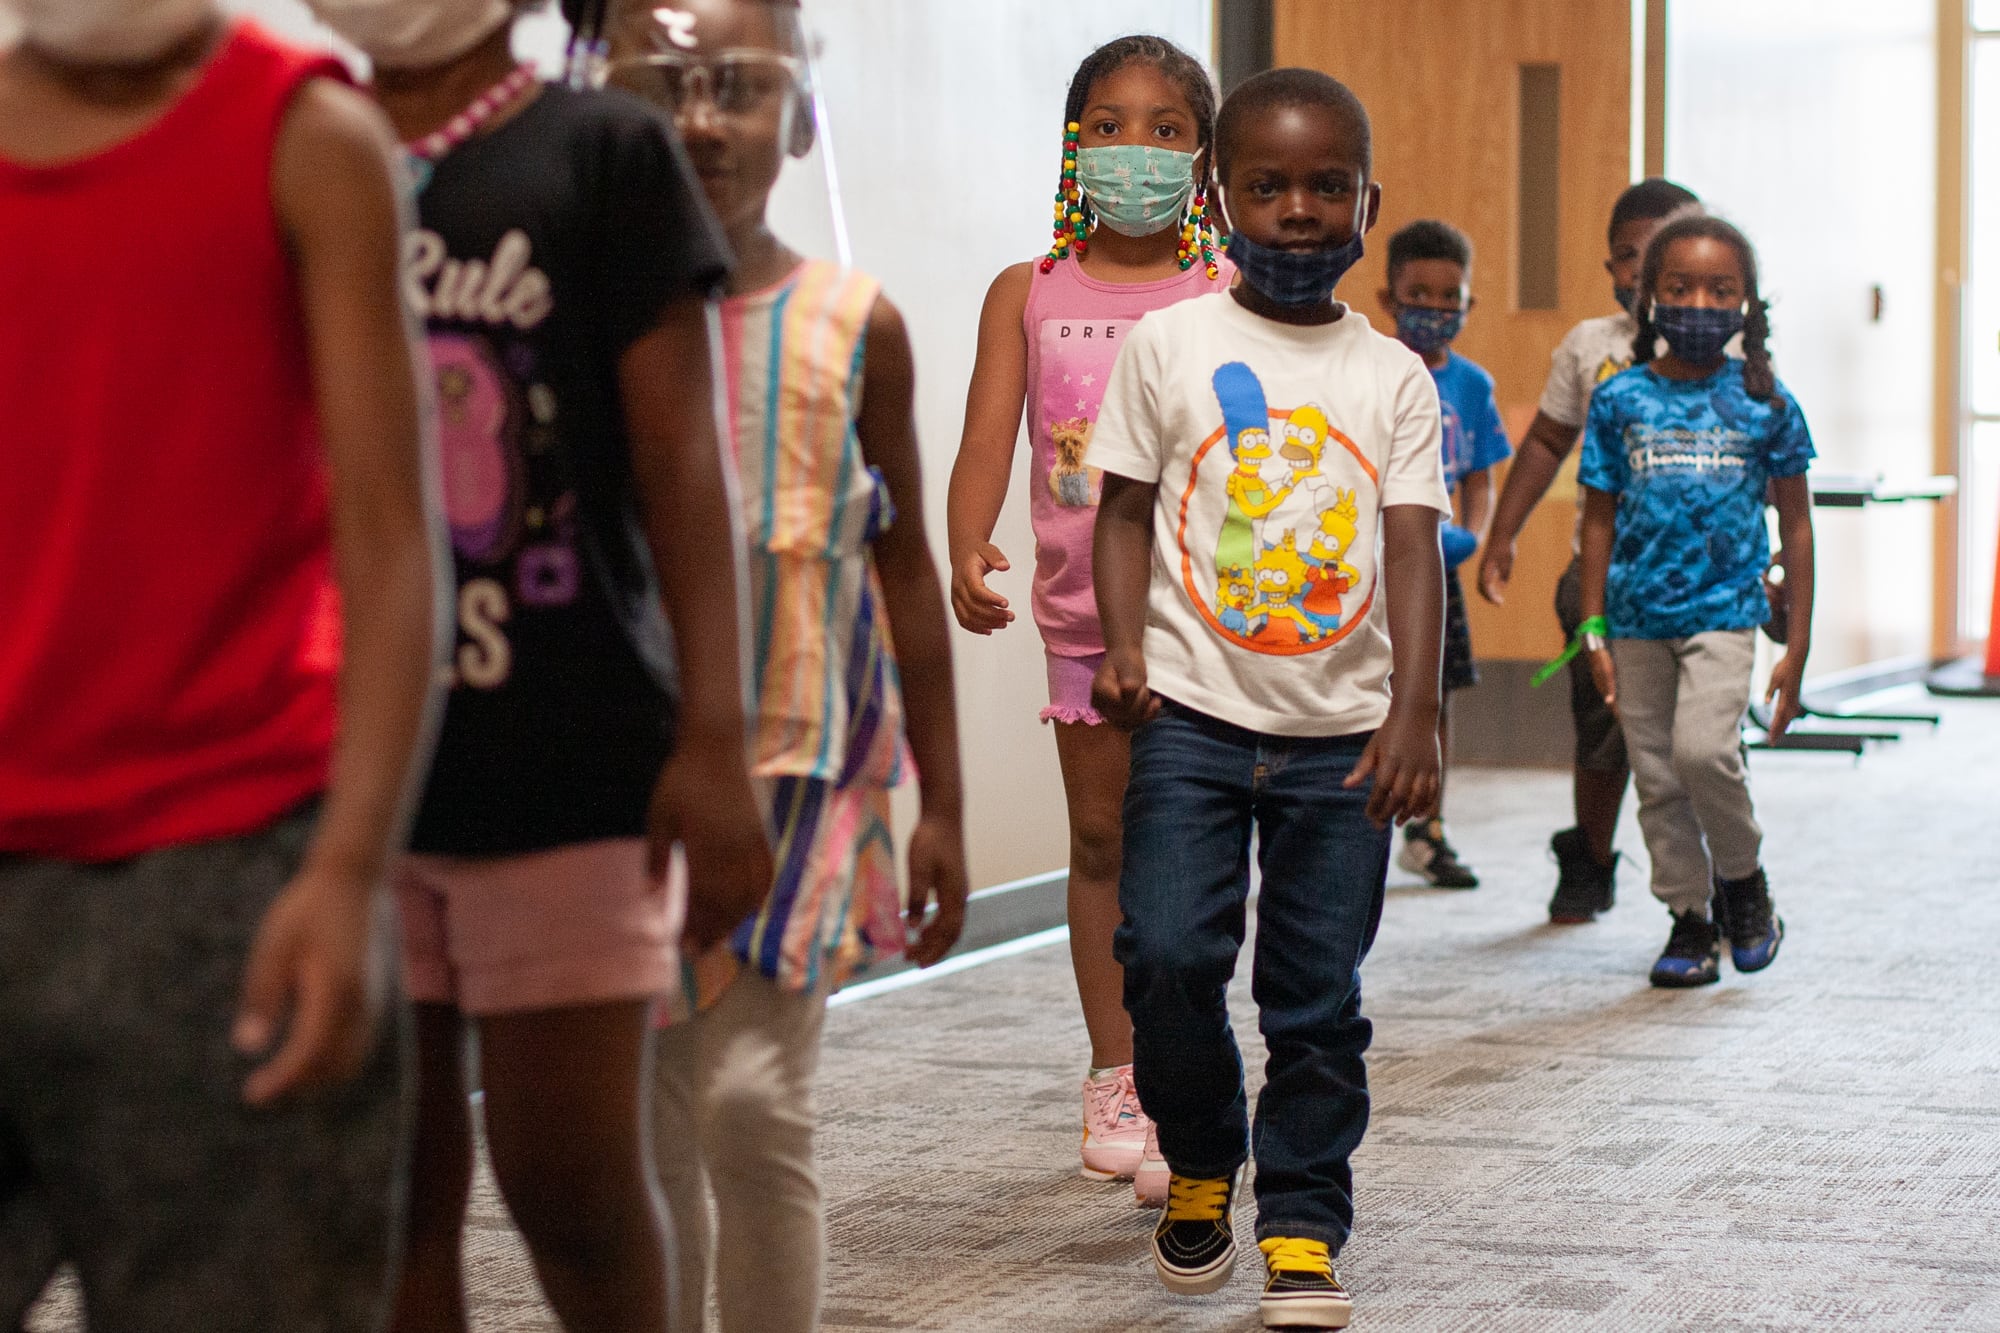 A group of kindergarten students with masks on walk down the hall in a line